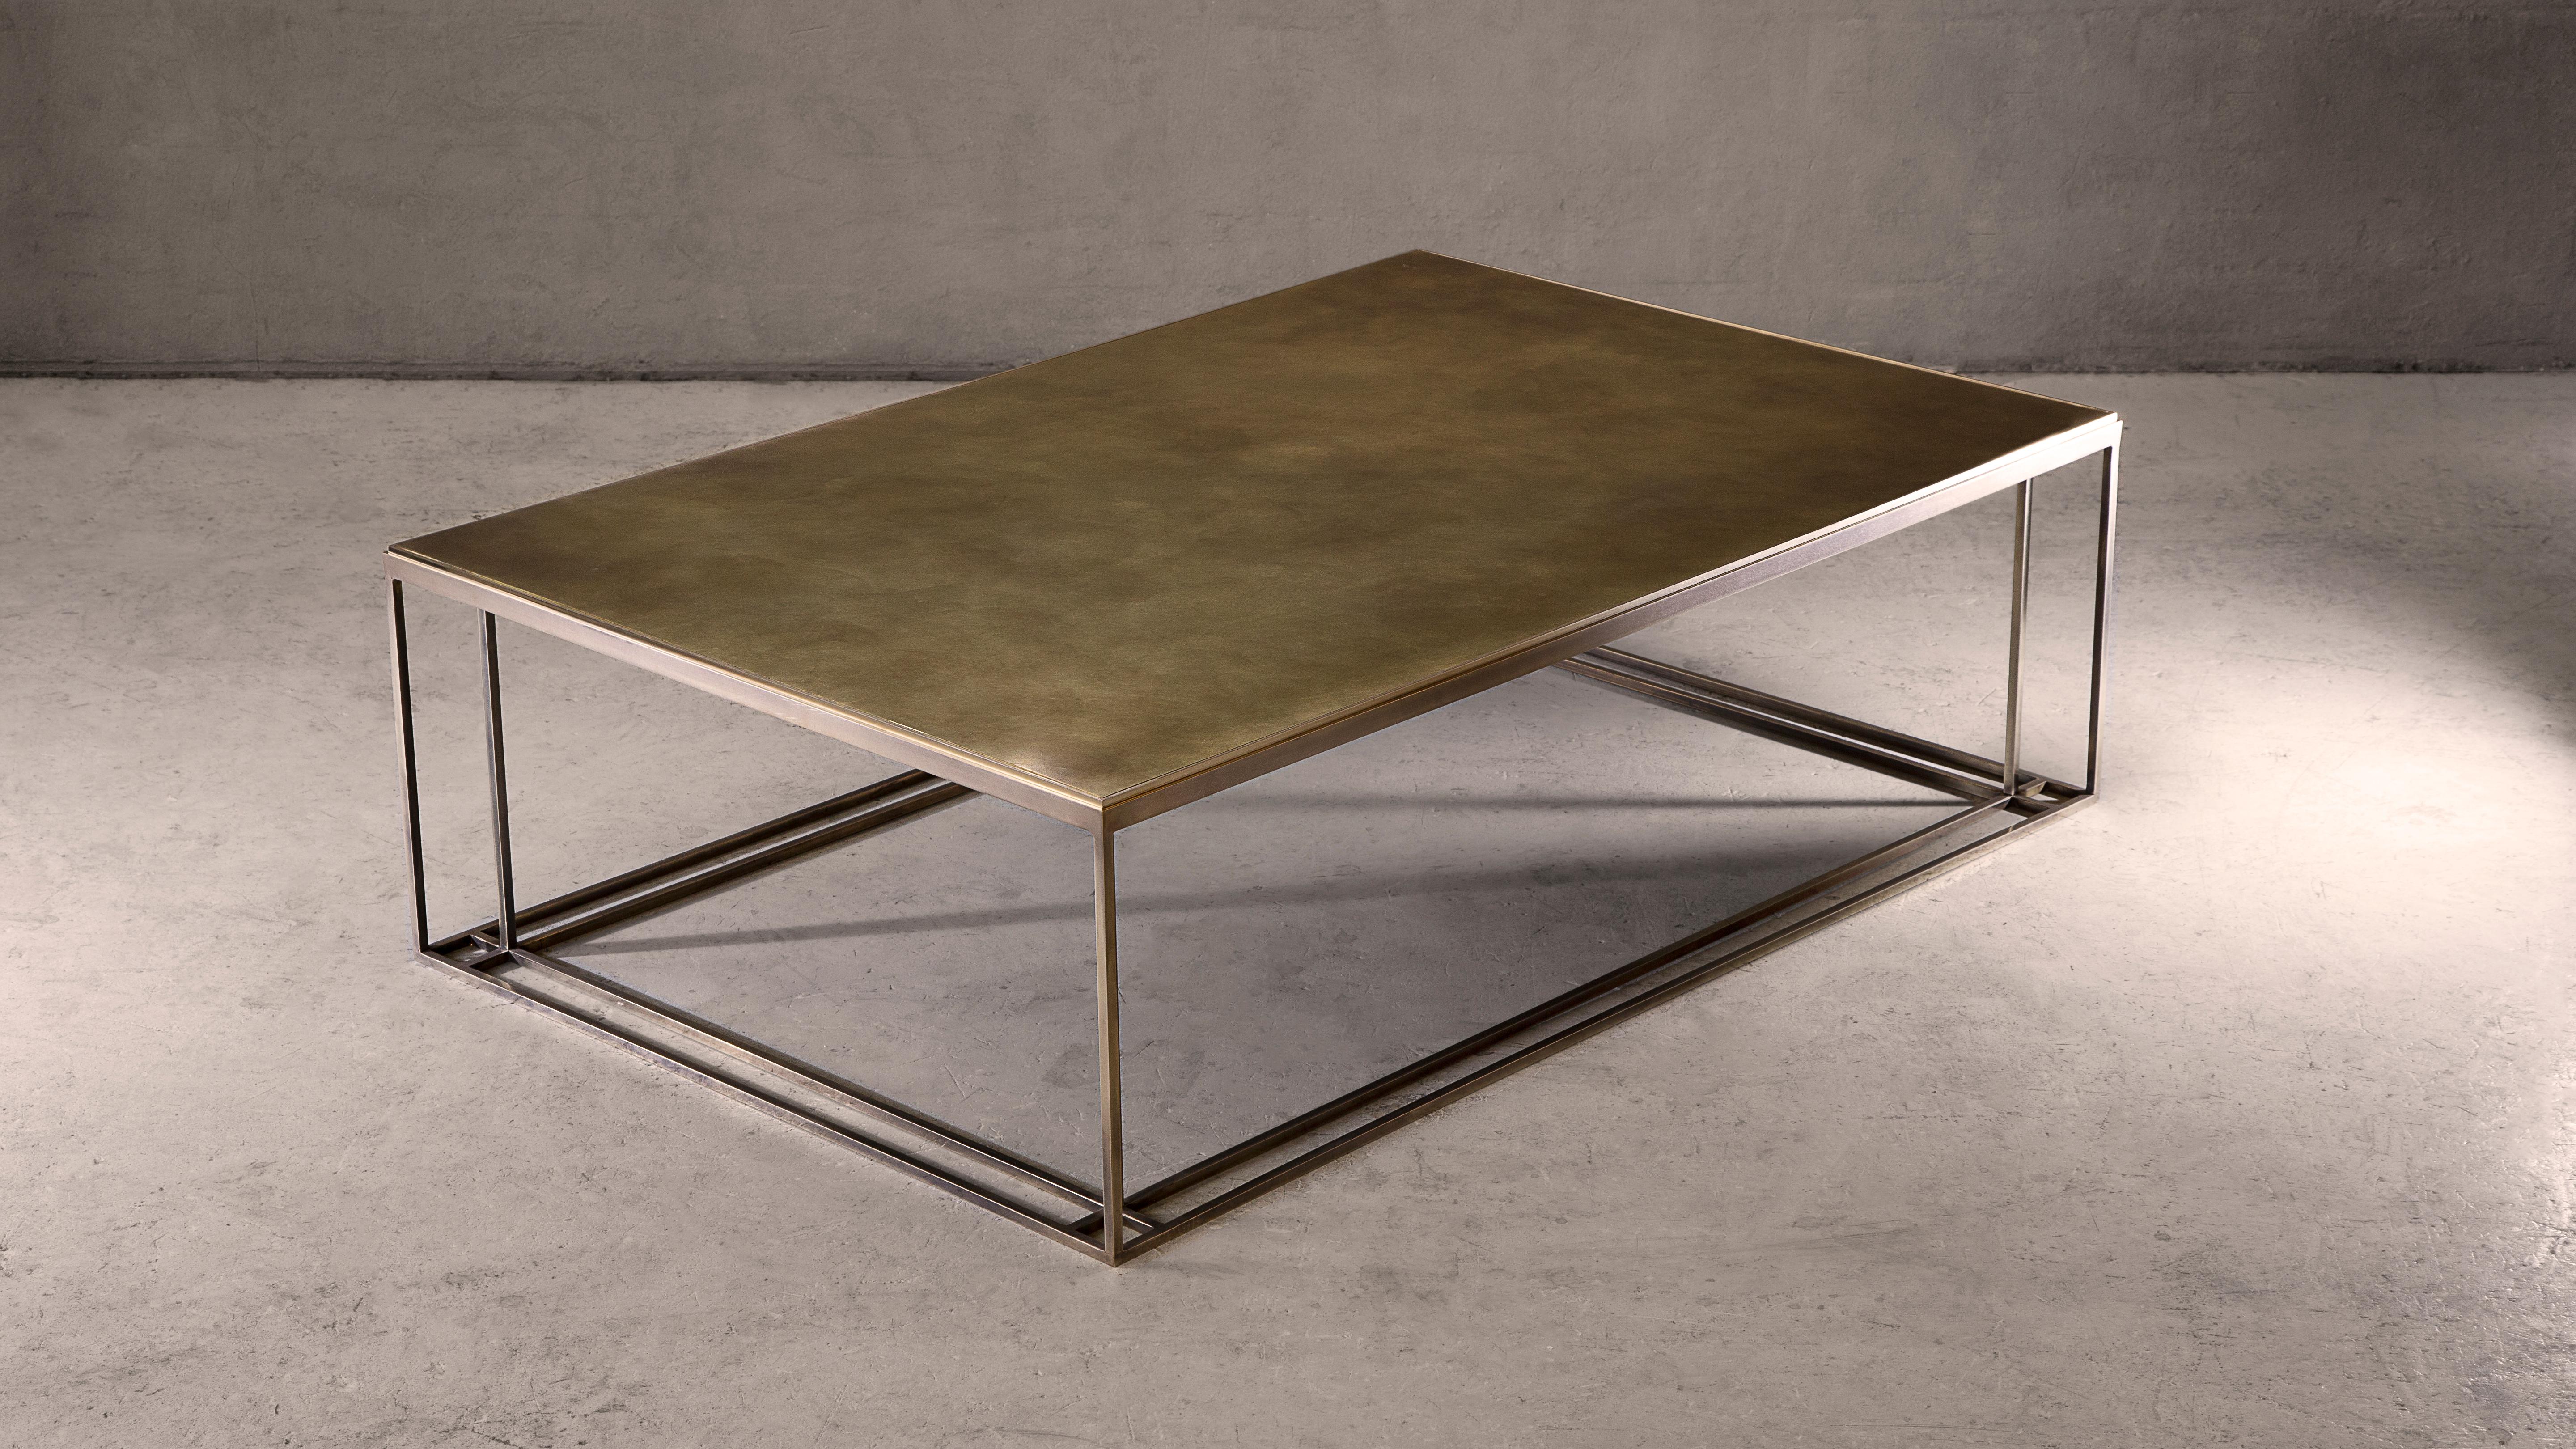 A coffee table in patinated brass. Hand crafted to order in the North. Bespoke finishes and sizes are available.

Measures: 160 cm width x 90 cm depth x 35 cm height.
Custom finishes and sizes available upon request.

Made to order in 12